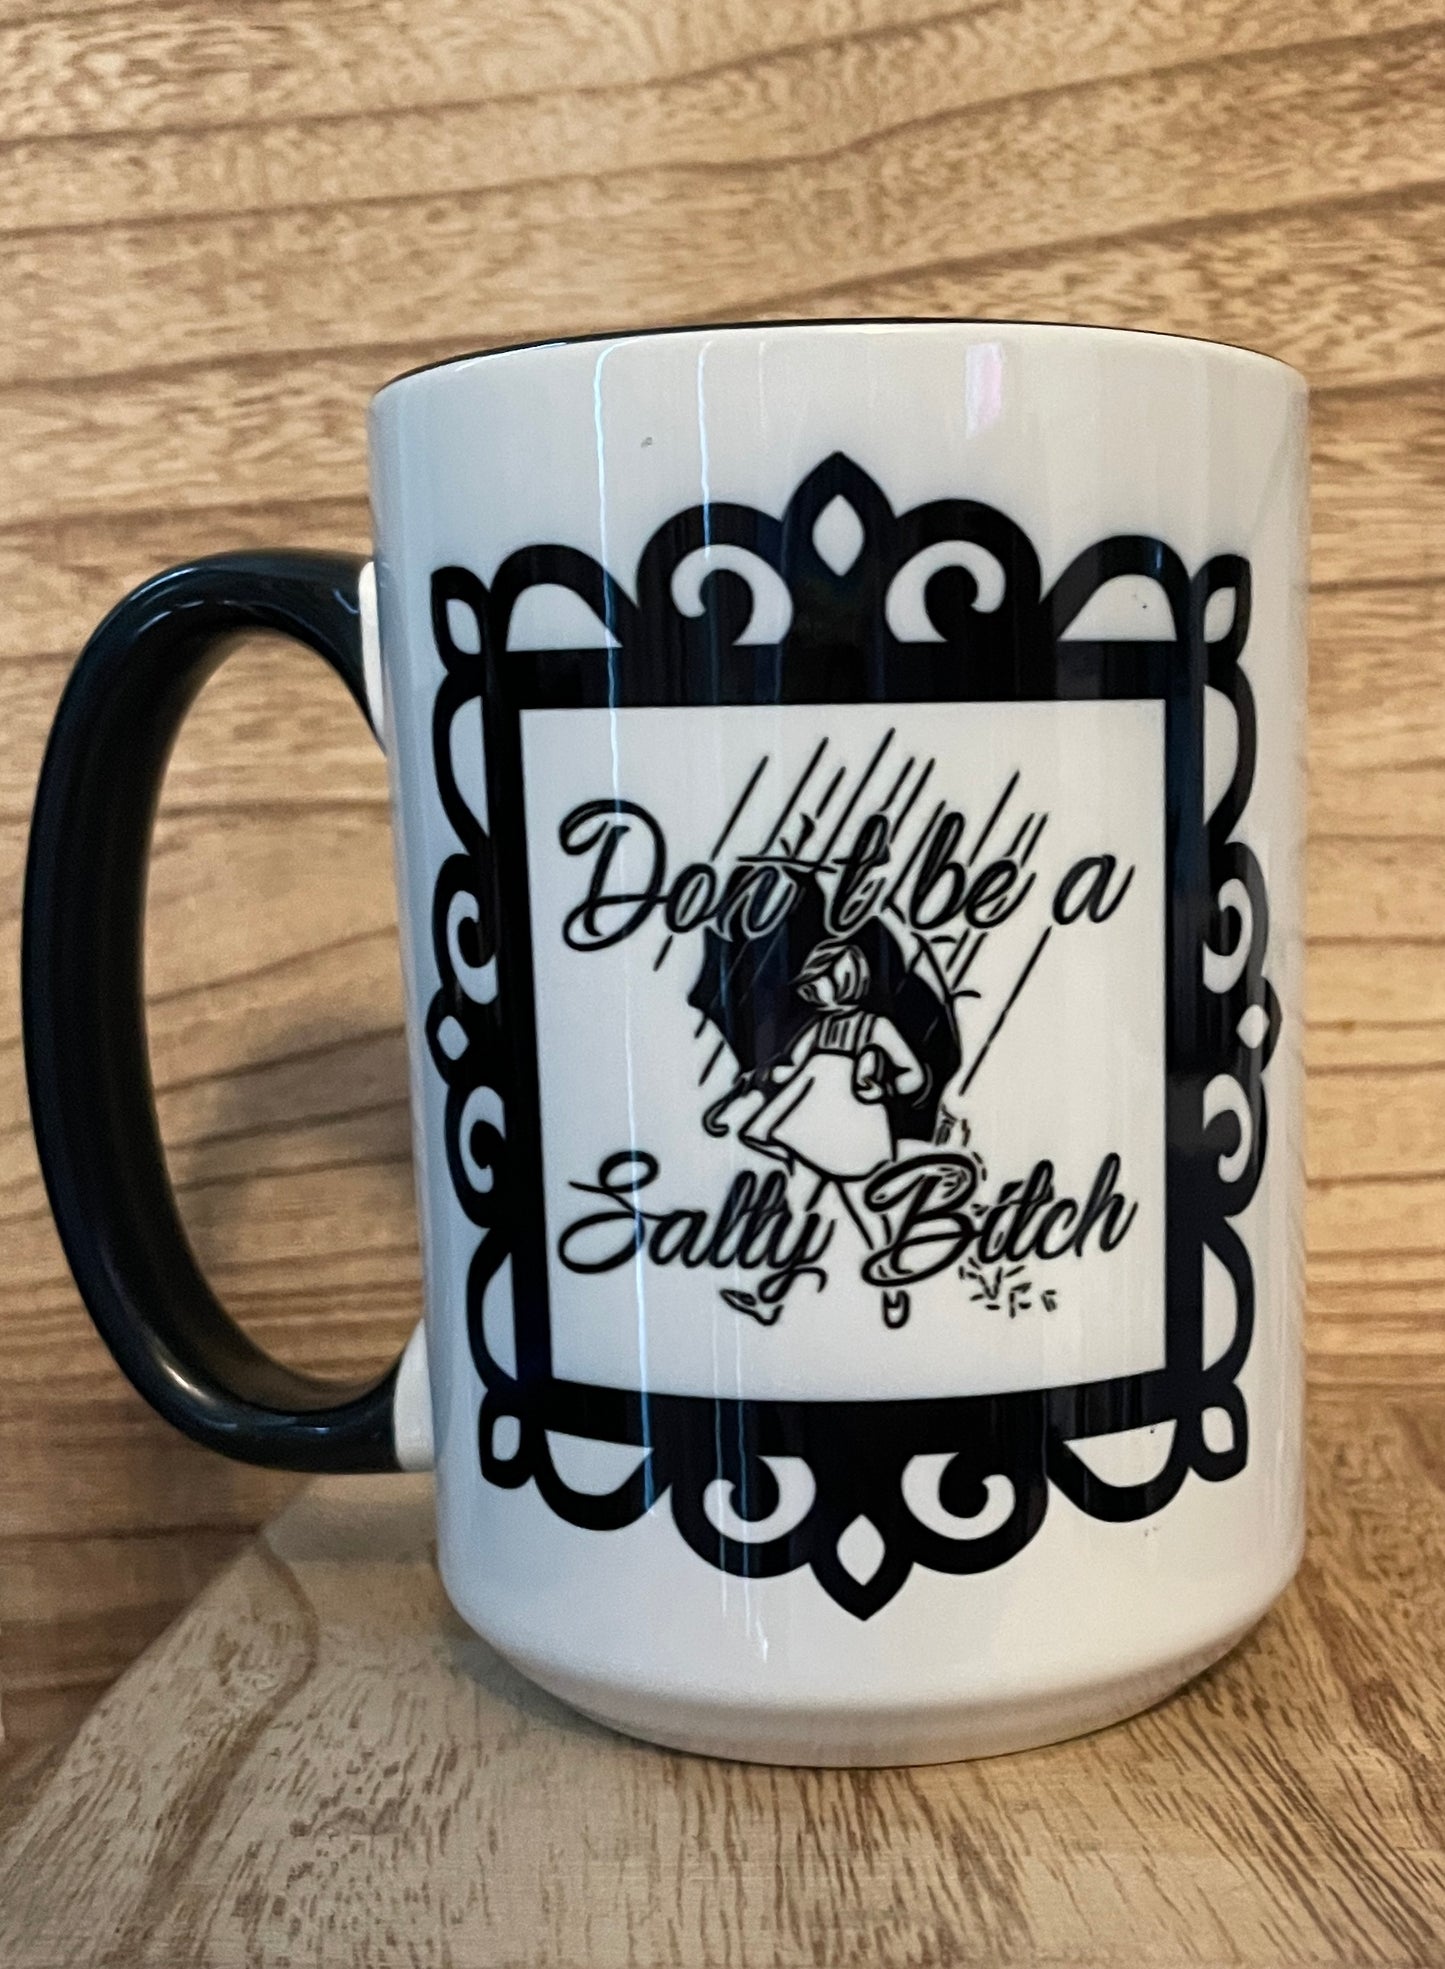 Don't be a Salty Bitch 15oz Coffee Cup